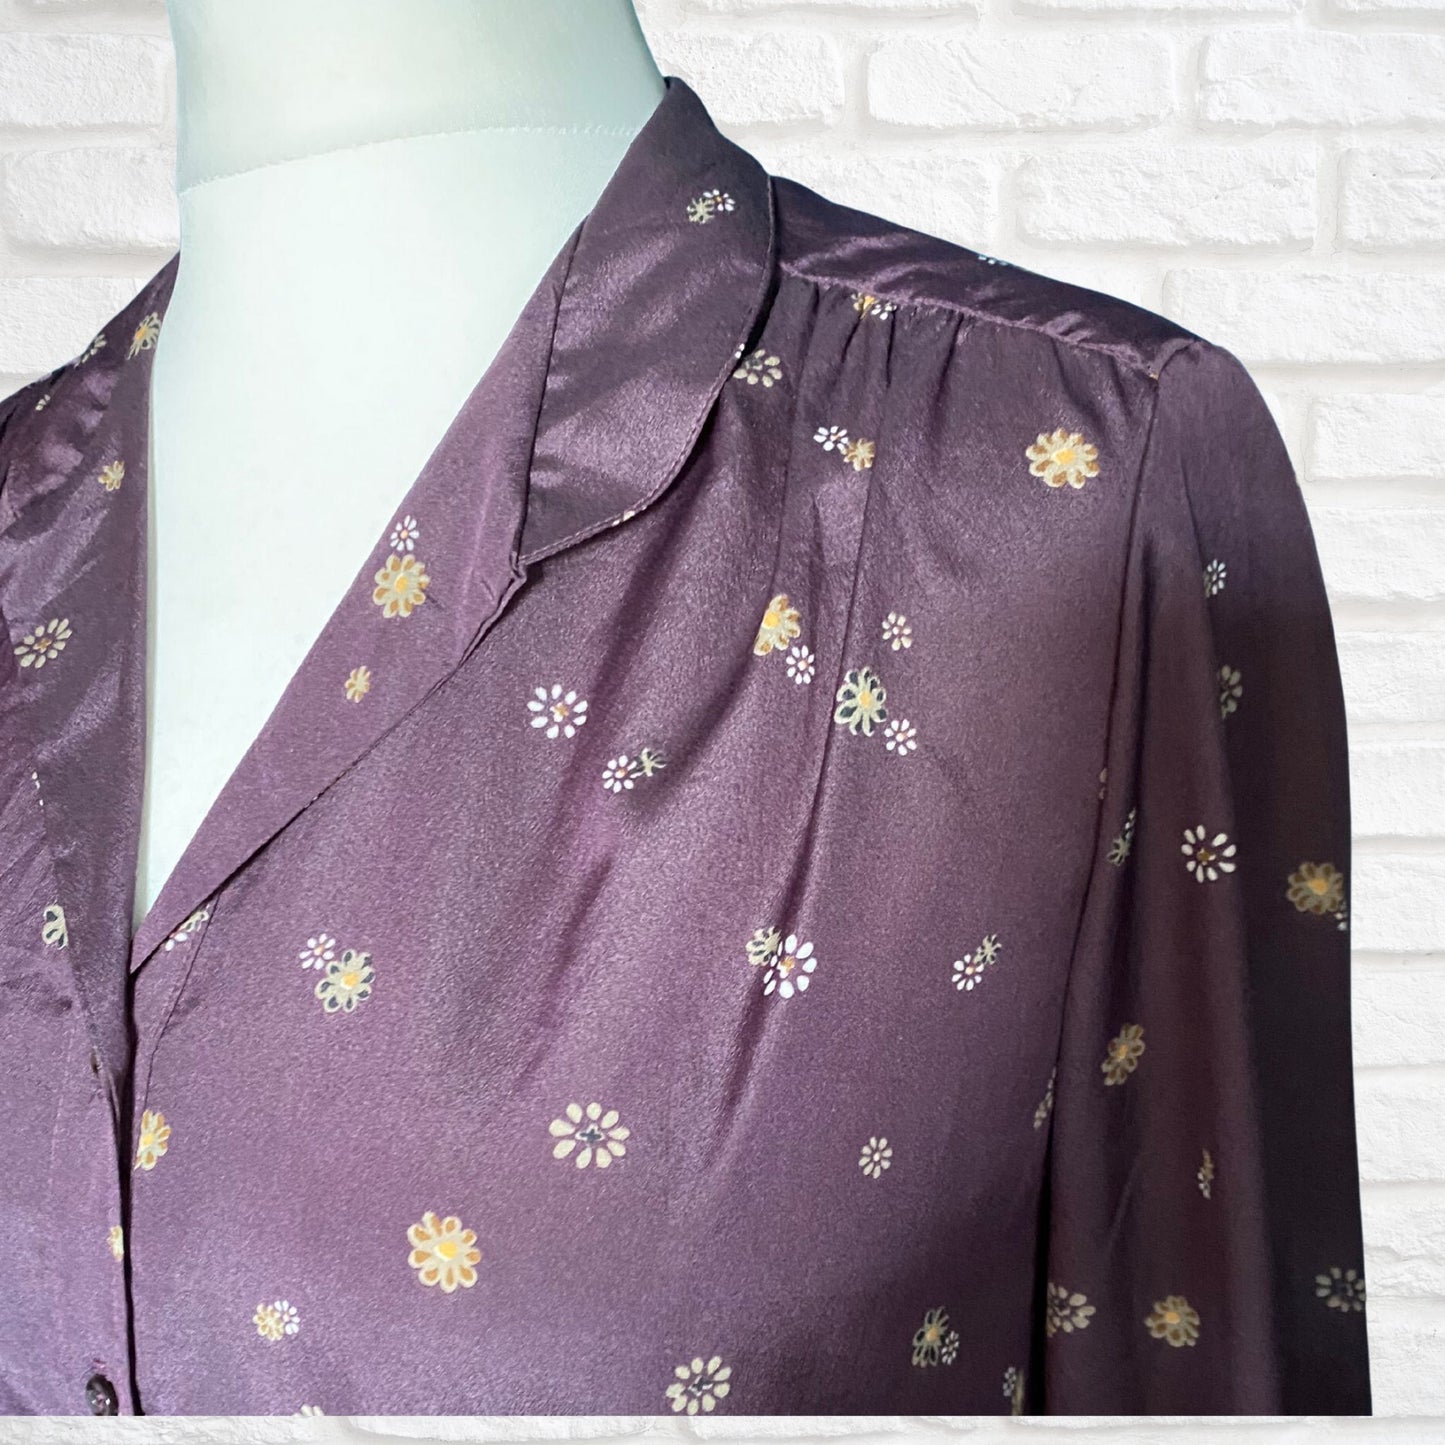 Vintage 60s Purple, White and Gold Silky Floral Blouse . Approx UK size 14-18